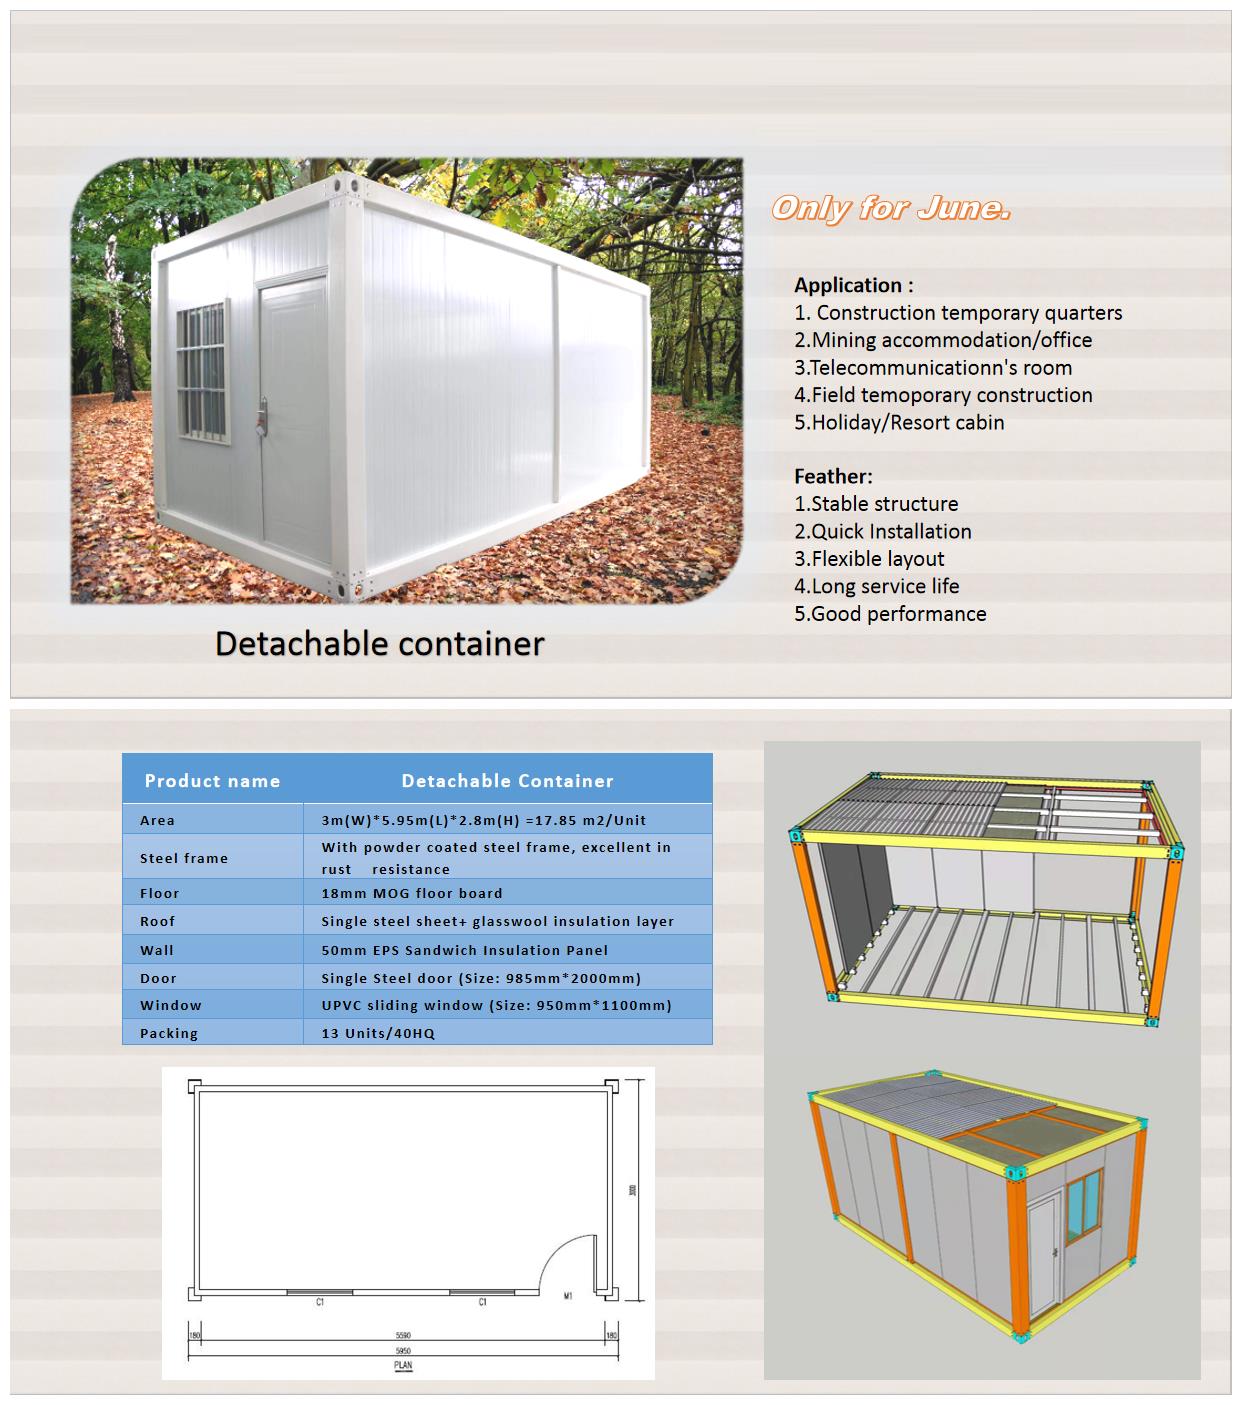 Detachable container offer